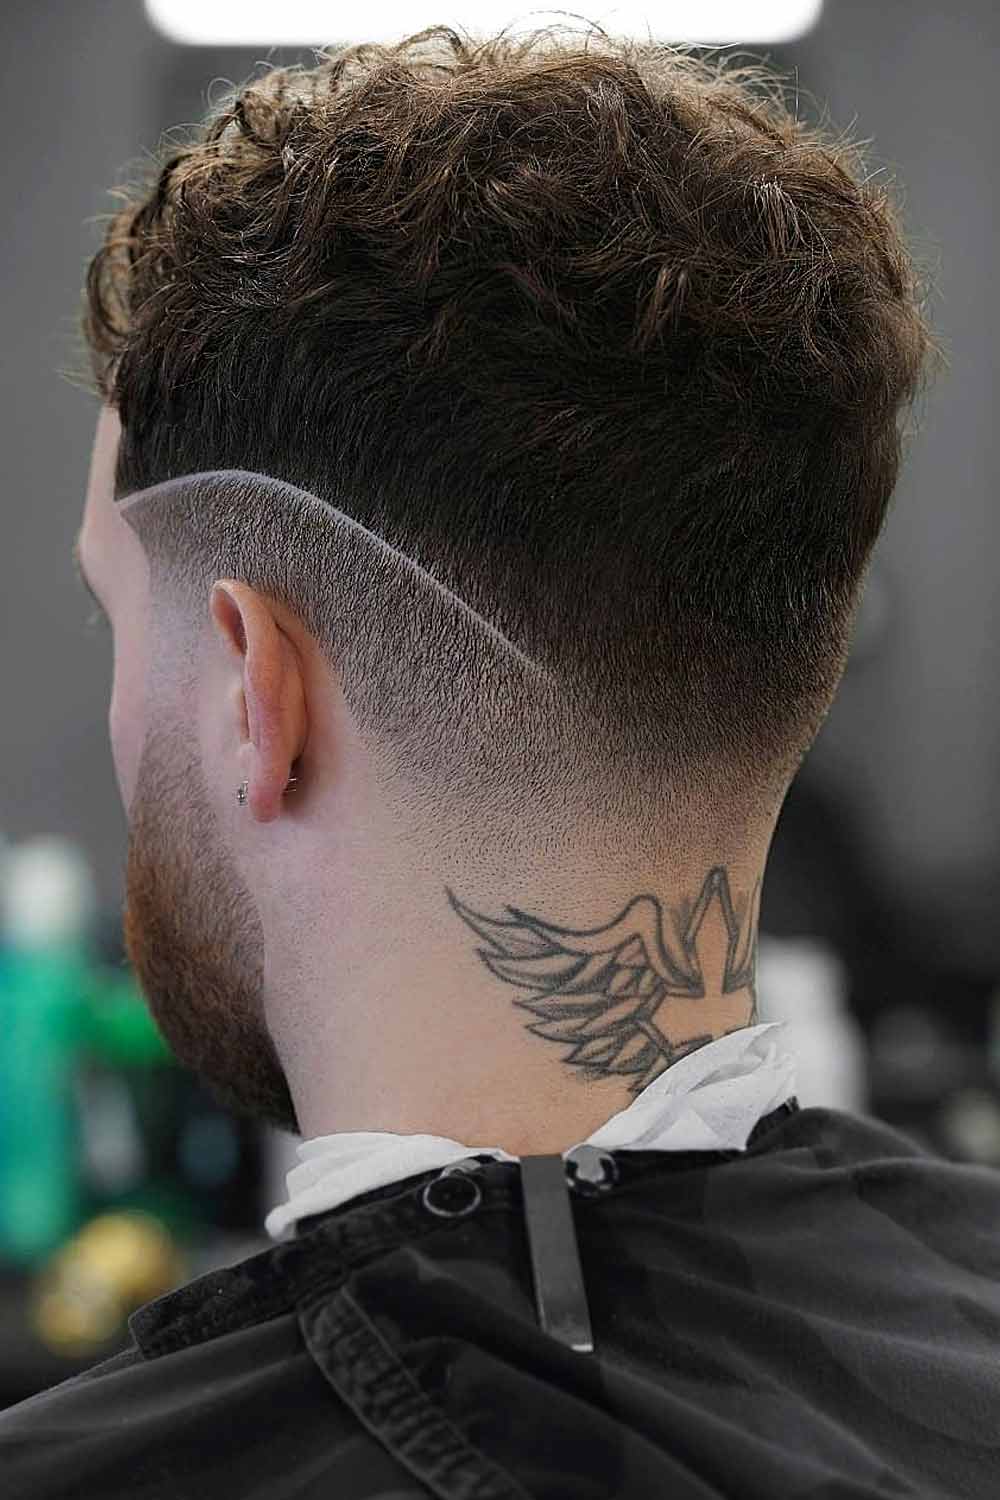 Curly Taper Fade with a Line Hairstyle #taperfadecurlyhair #taperfade #curlyhair #taper #fade